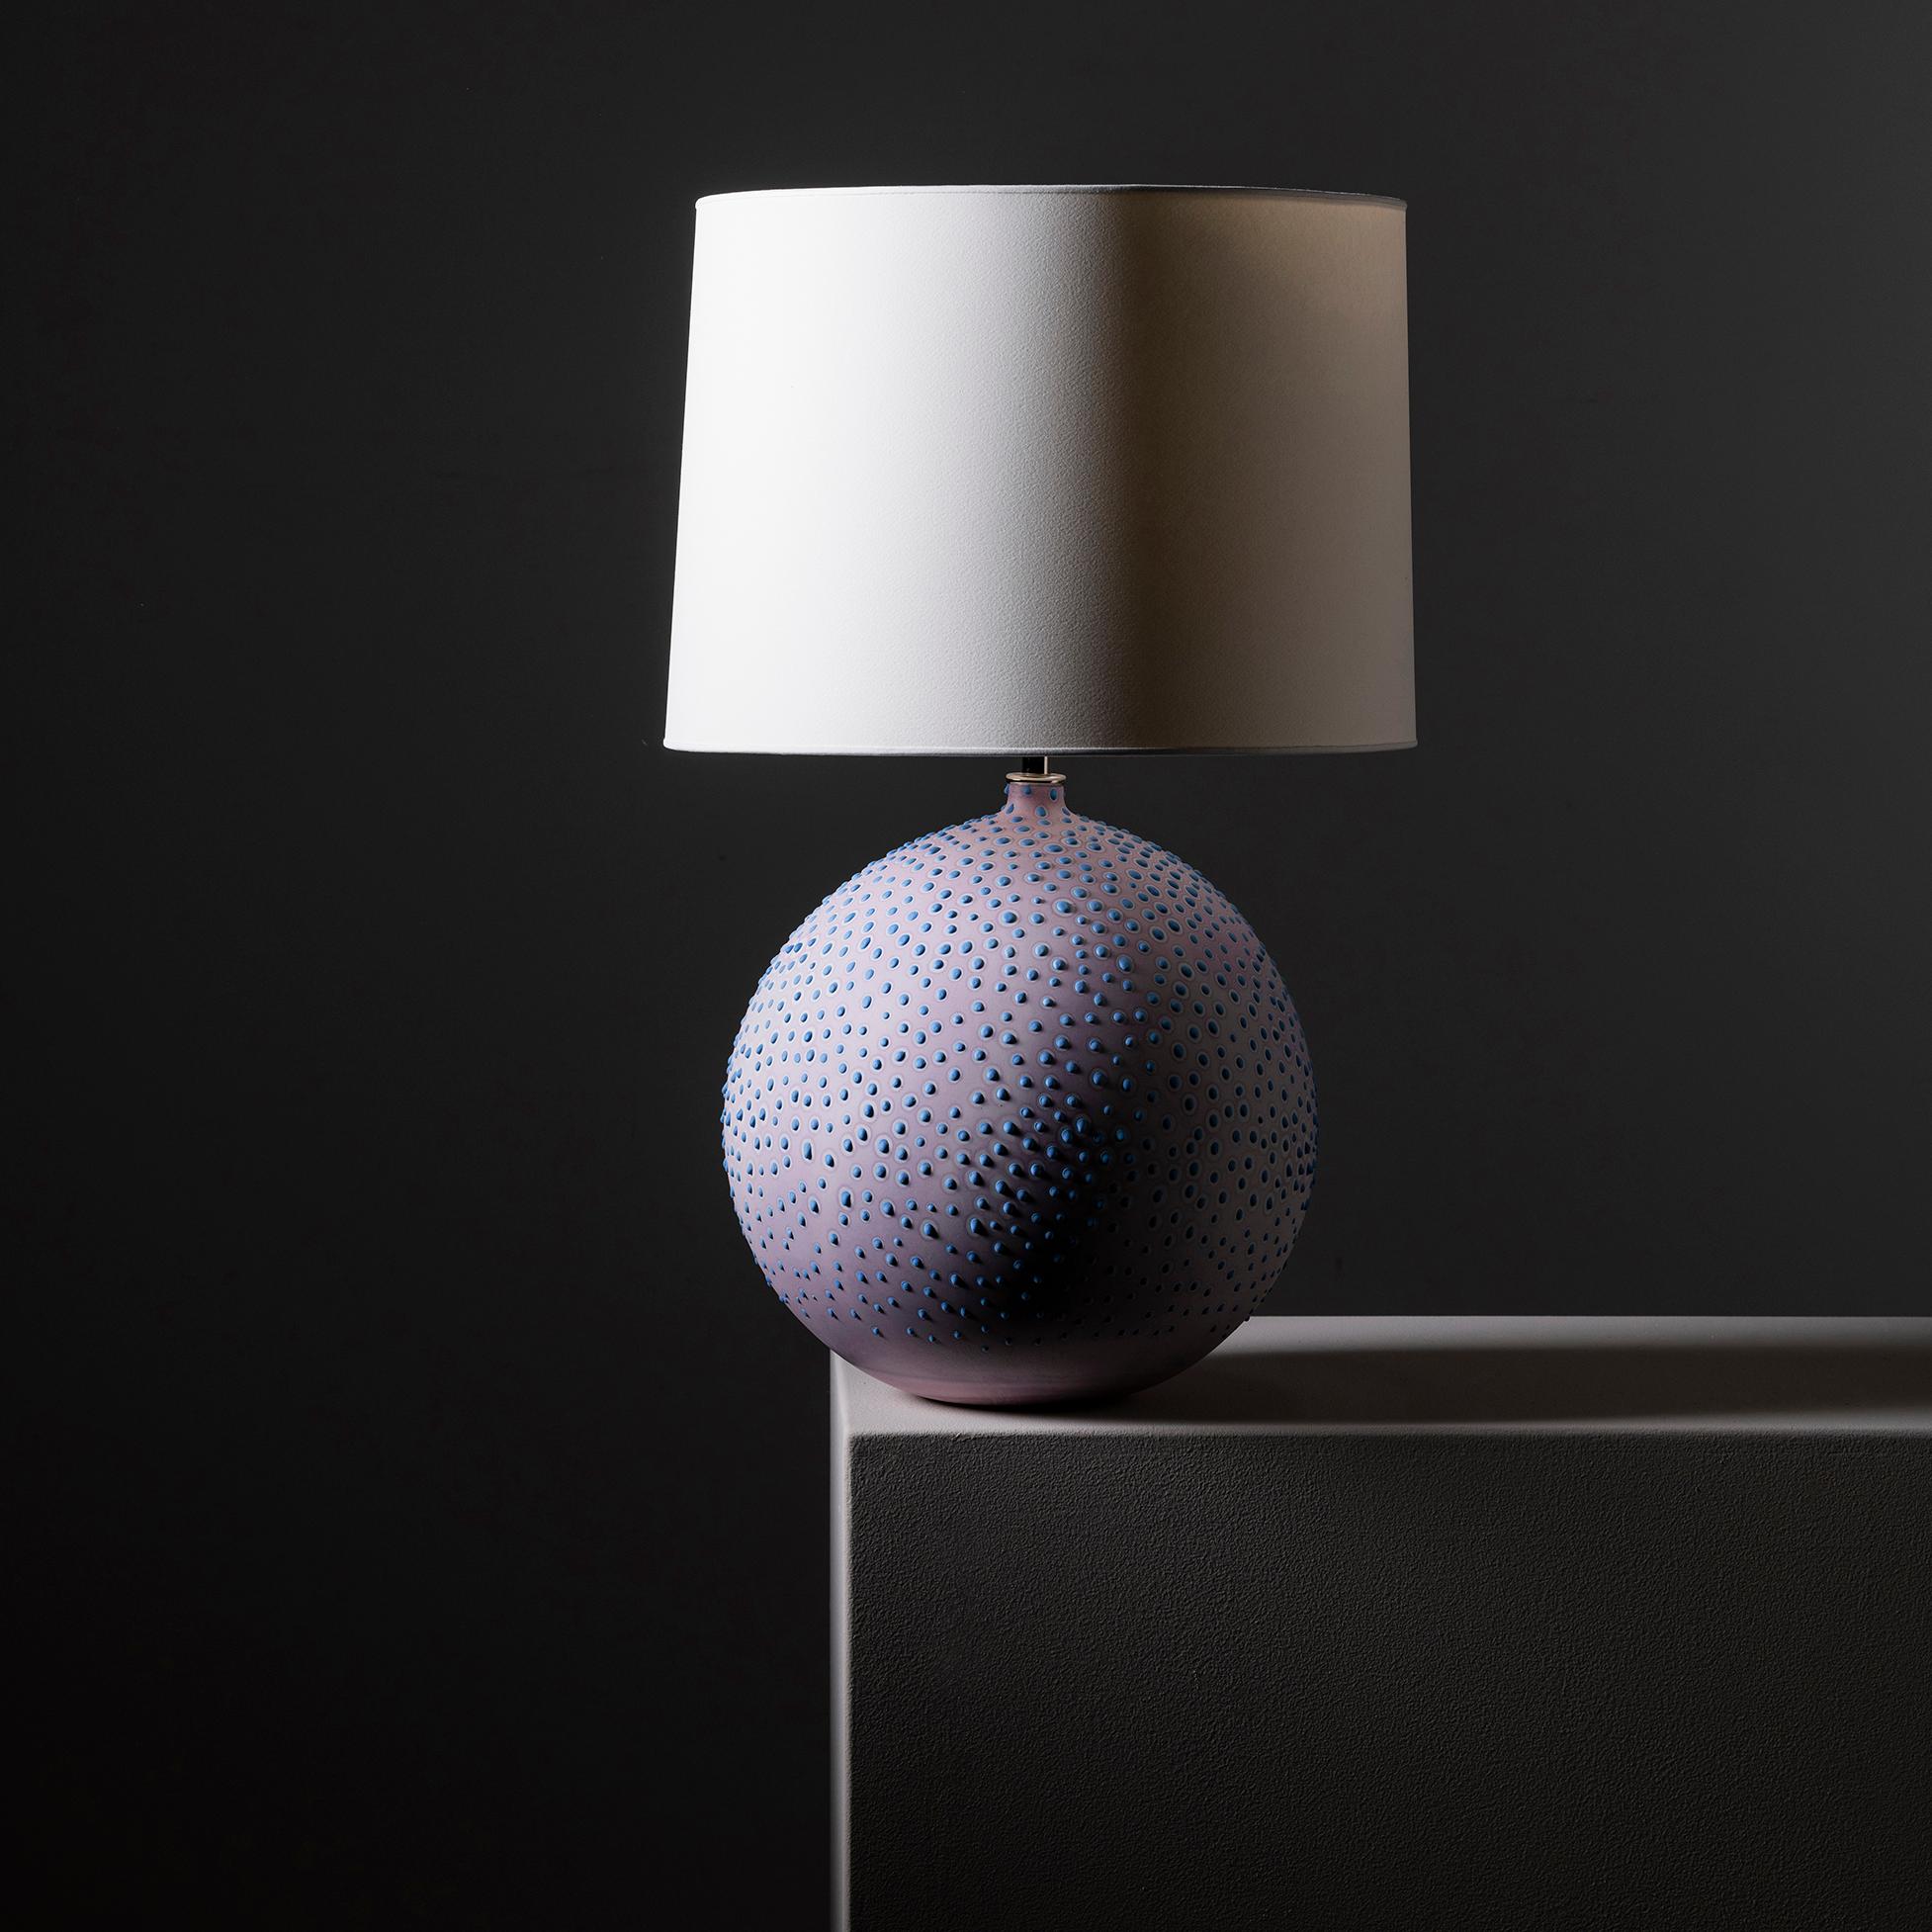 This collection is inspired by the unique galaxy of microorganisms living within each of us. We created a technique for dying and stippling each base that evokes the nature of microbes as they grow and colonize.

The base of each lamp is hand-cast